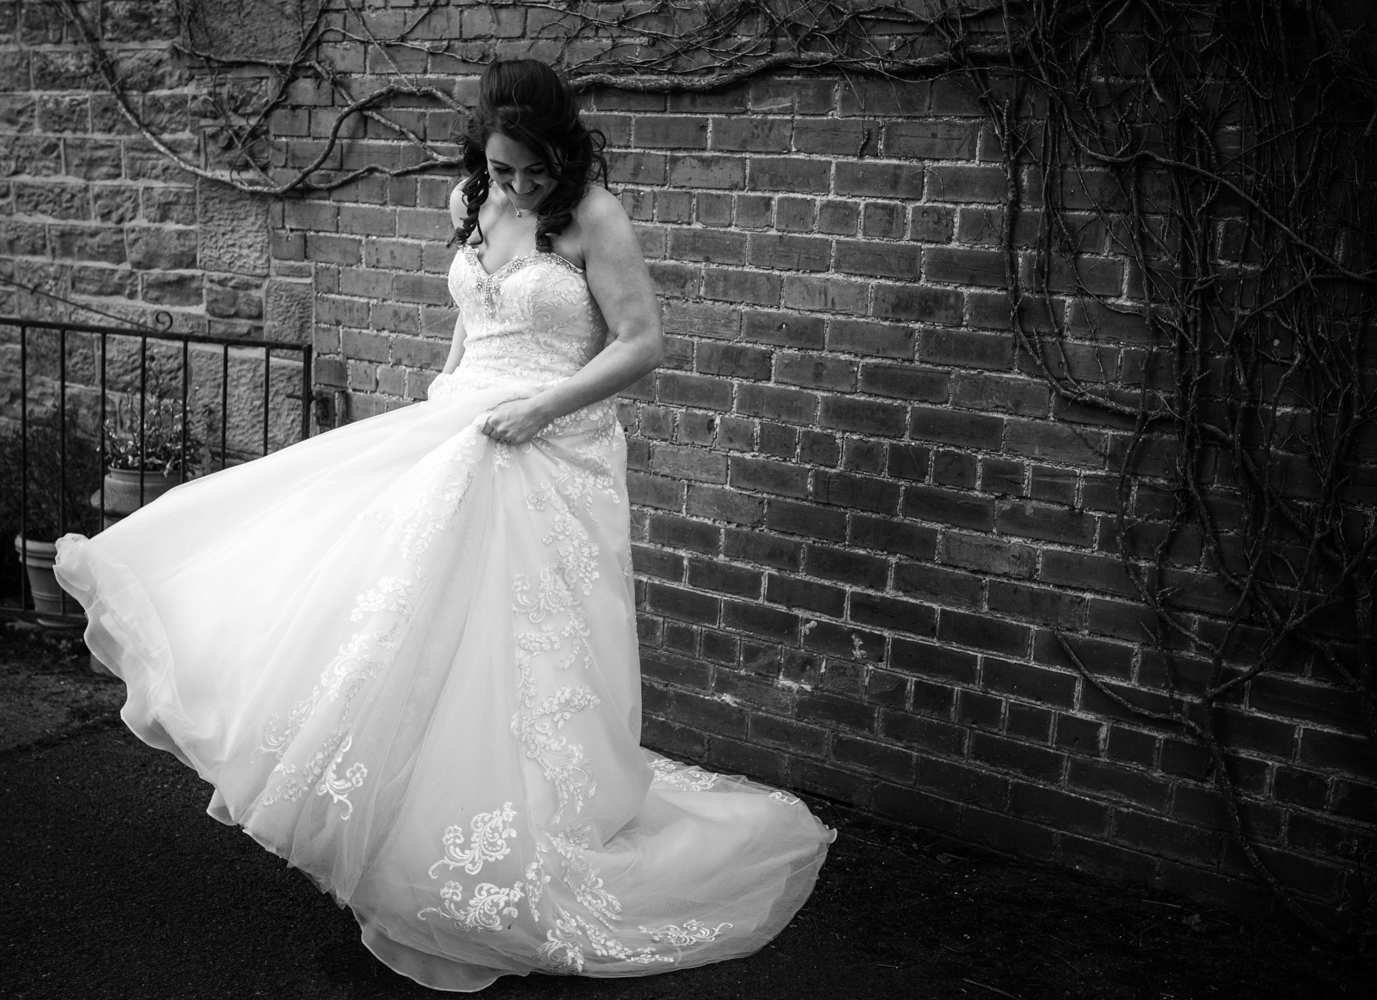 Black and white photo of the bride swirling her wedding dress around